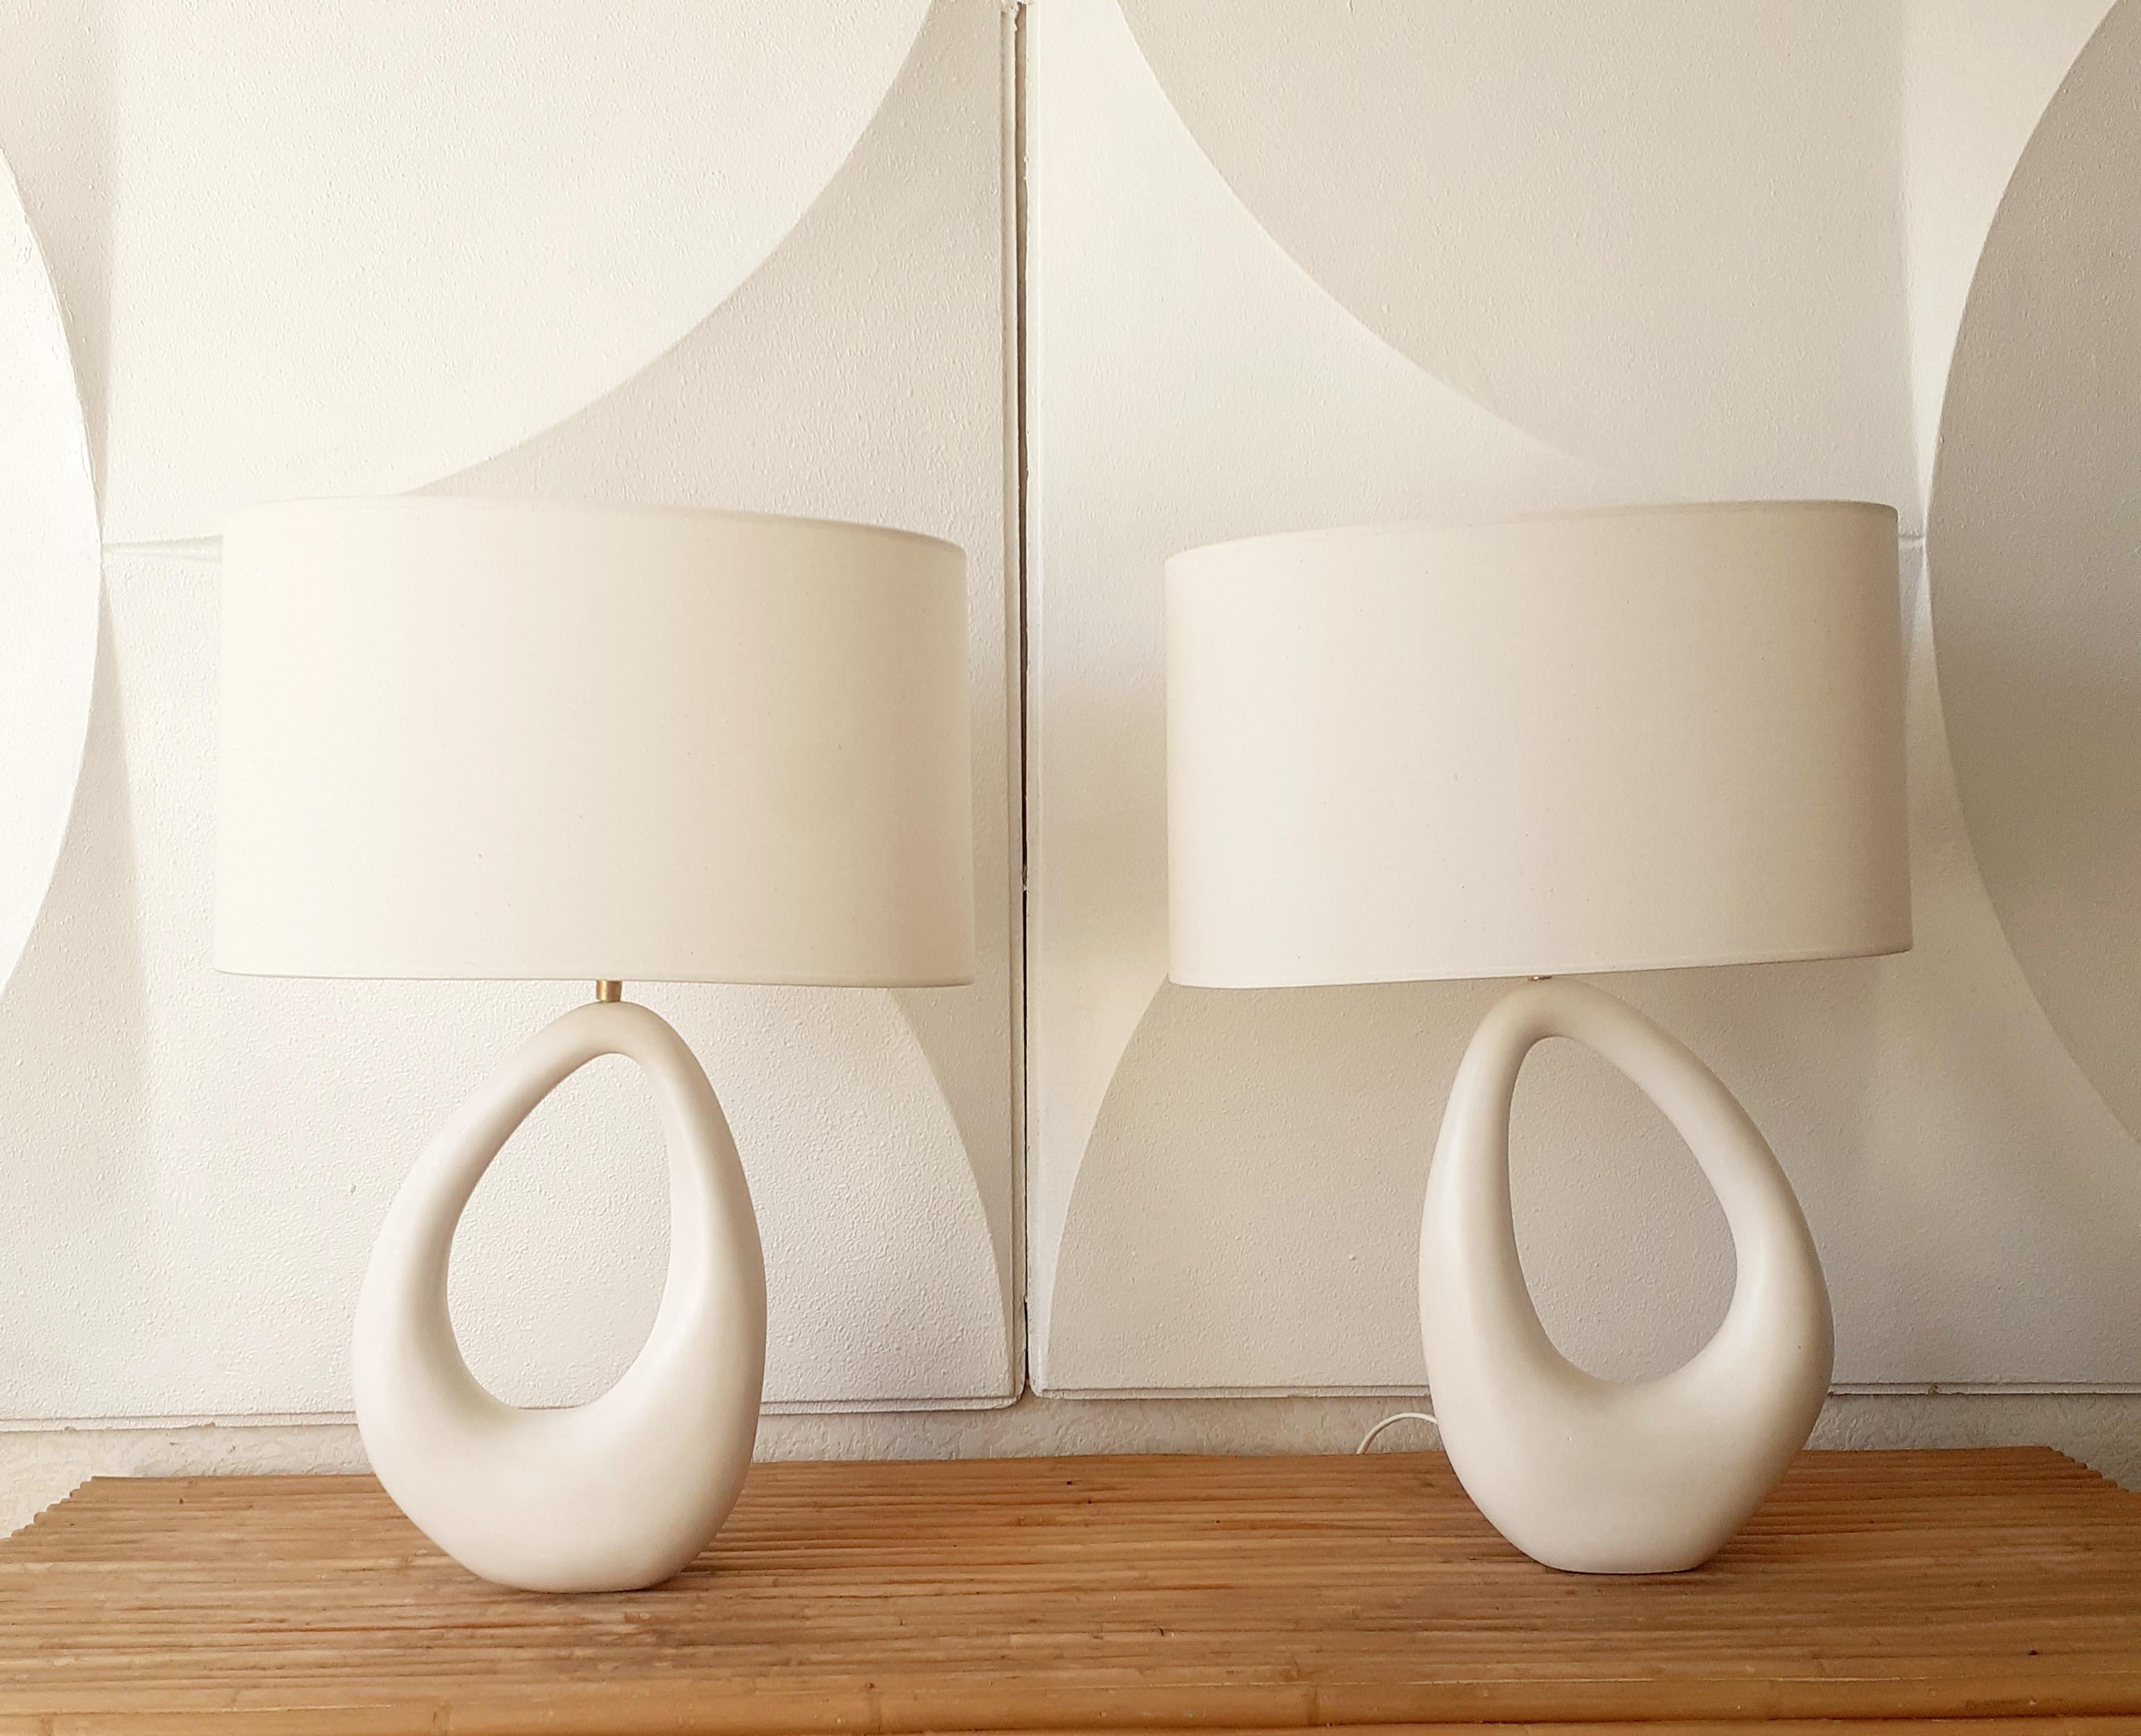 - Elegant ceramic lamp with shade, handmade in Parisian workshop by Elsa Foulon Studio.
Mineral, organic and sensual shape.
Cotton shade, brass structure, soft white enameled ceramic, screw bulb. 
Ceramic height: 14,56 inch.
Ceramic + shade